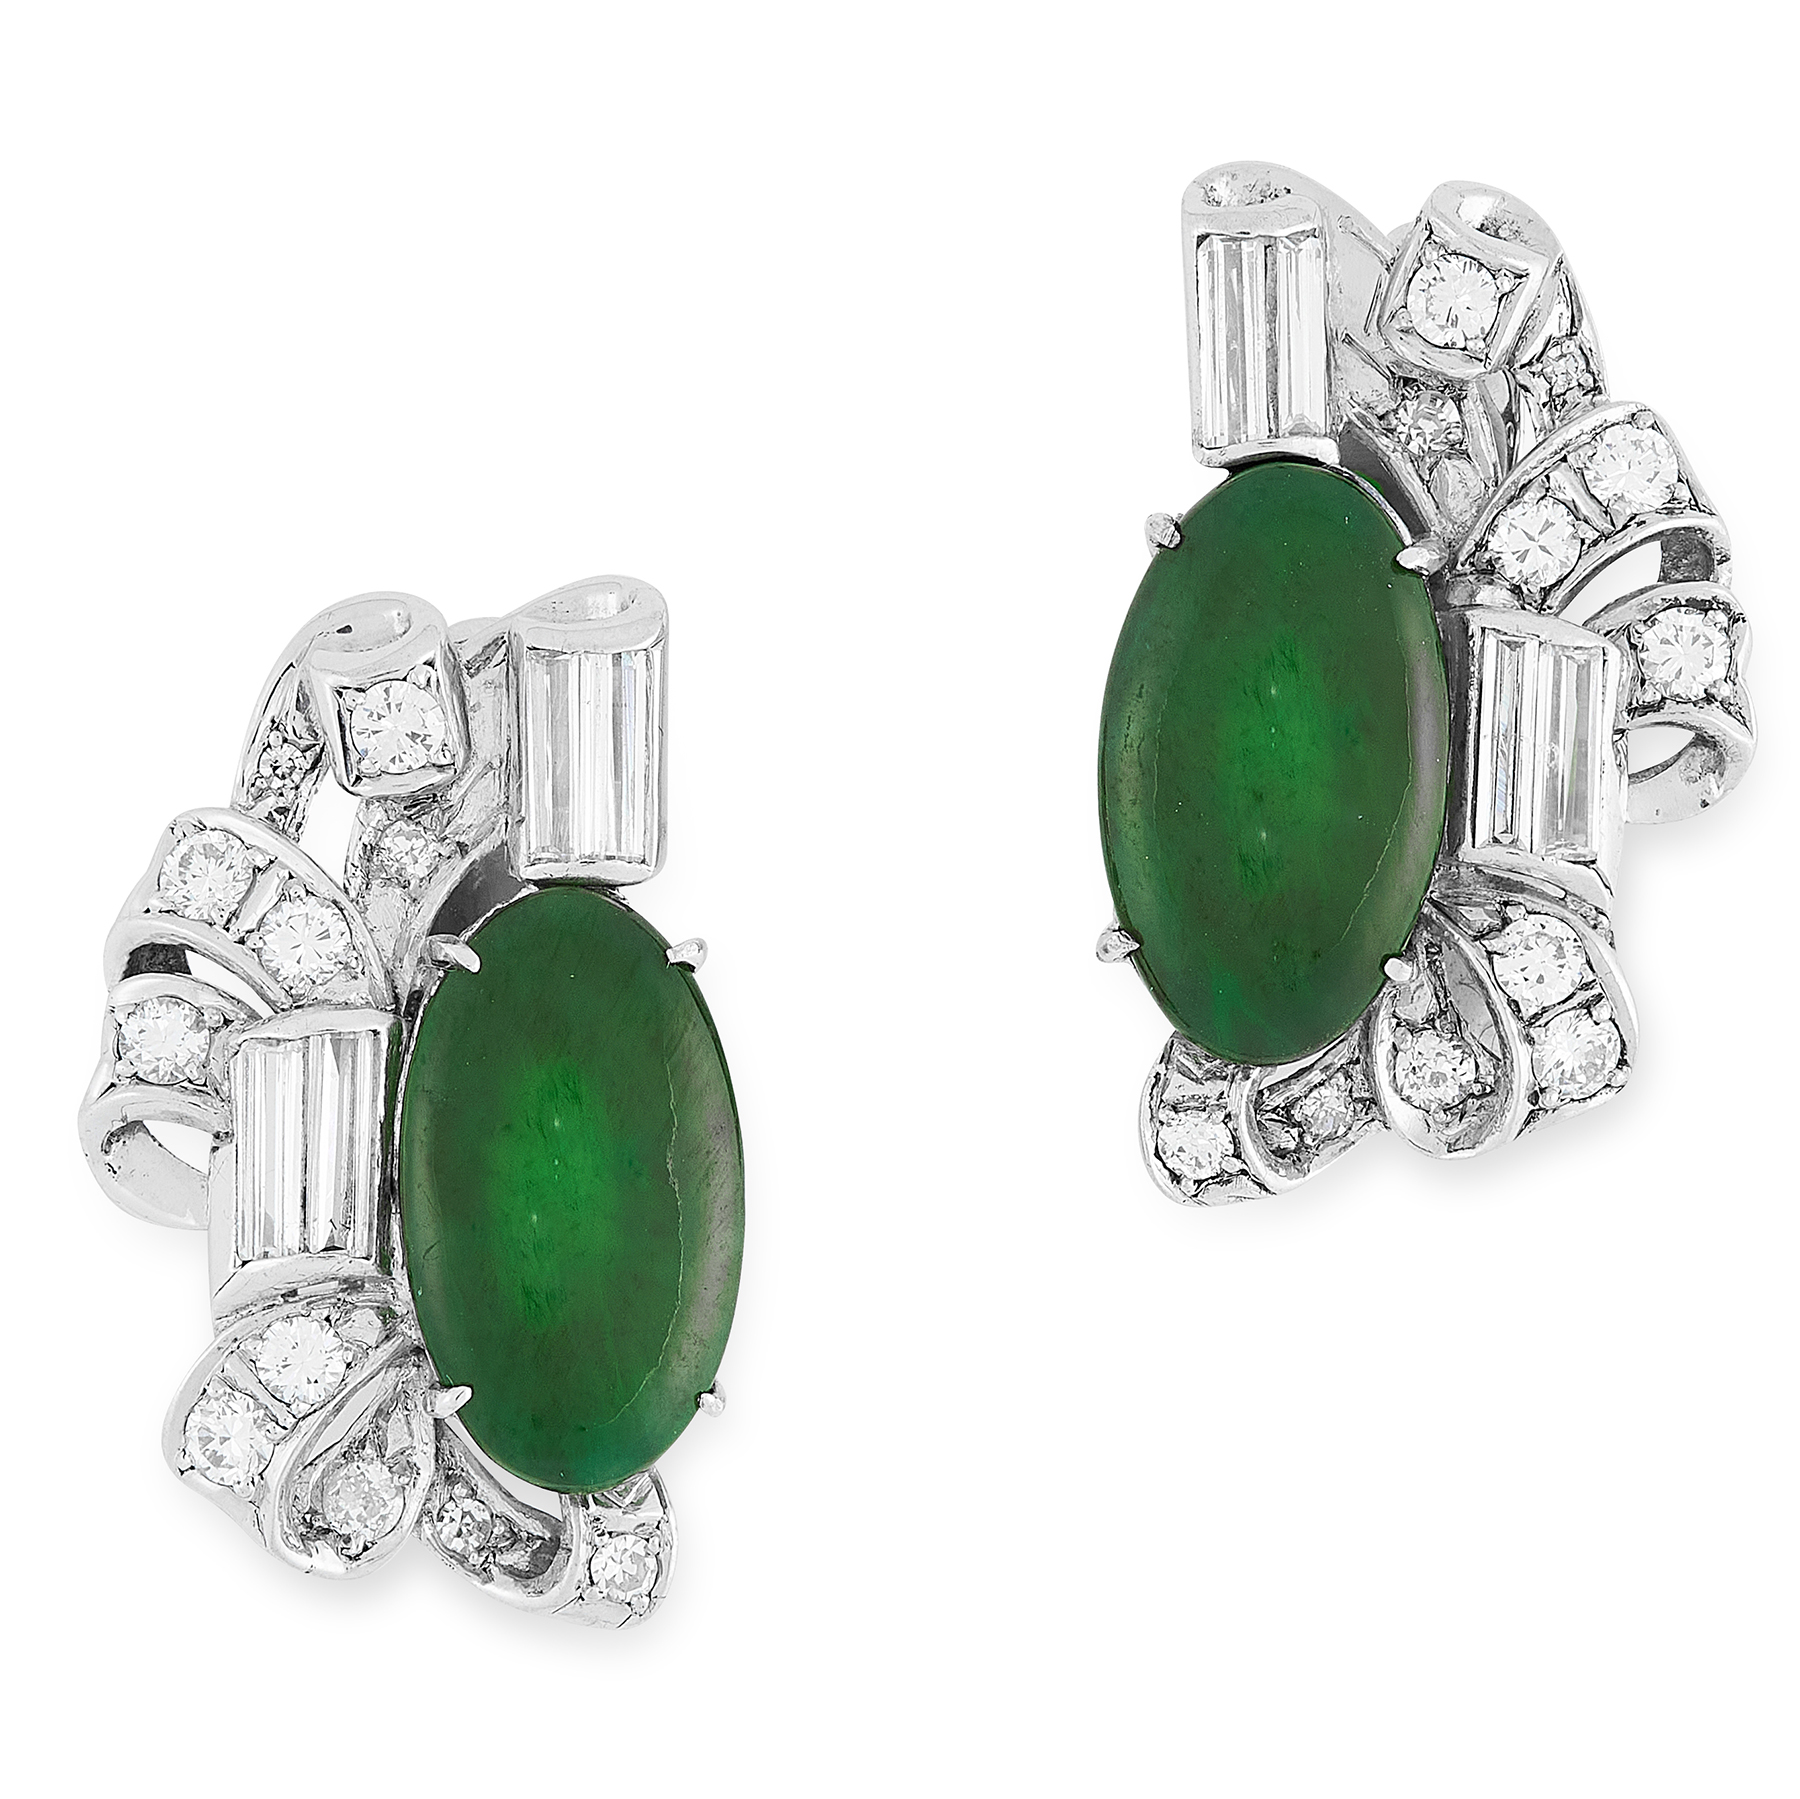 A PAIR OF JADEITE JADE AND DIAMOND CLIP EARRINGS each set with an oval jadeite cabochon of 3.01